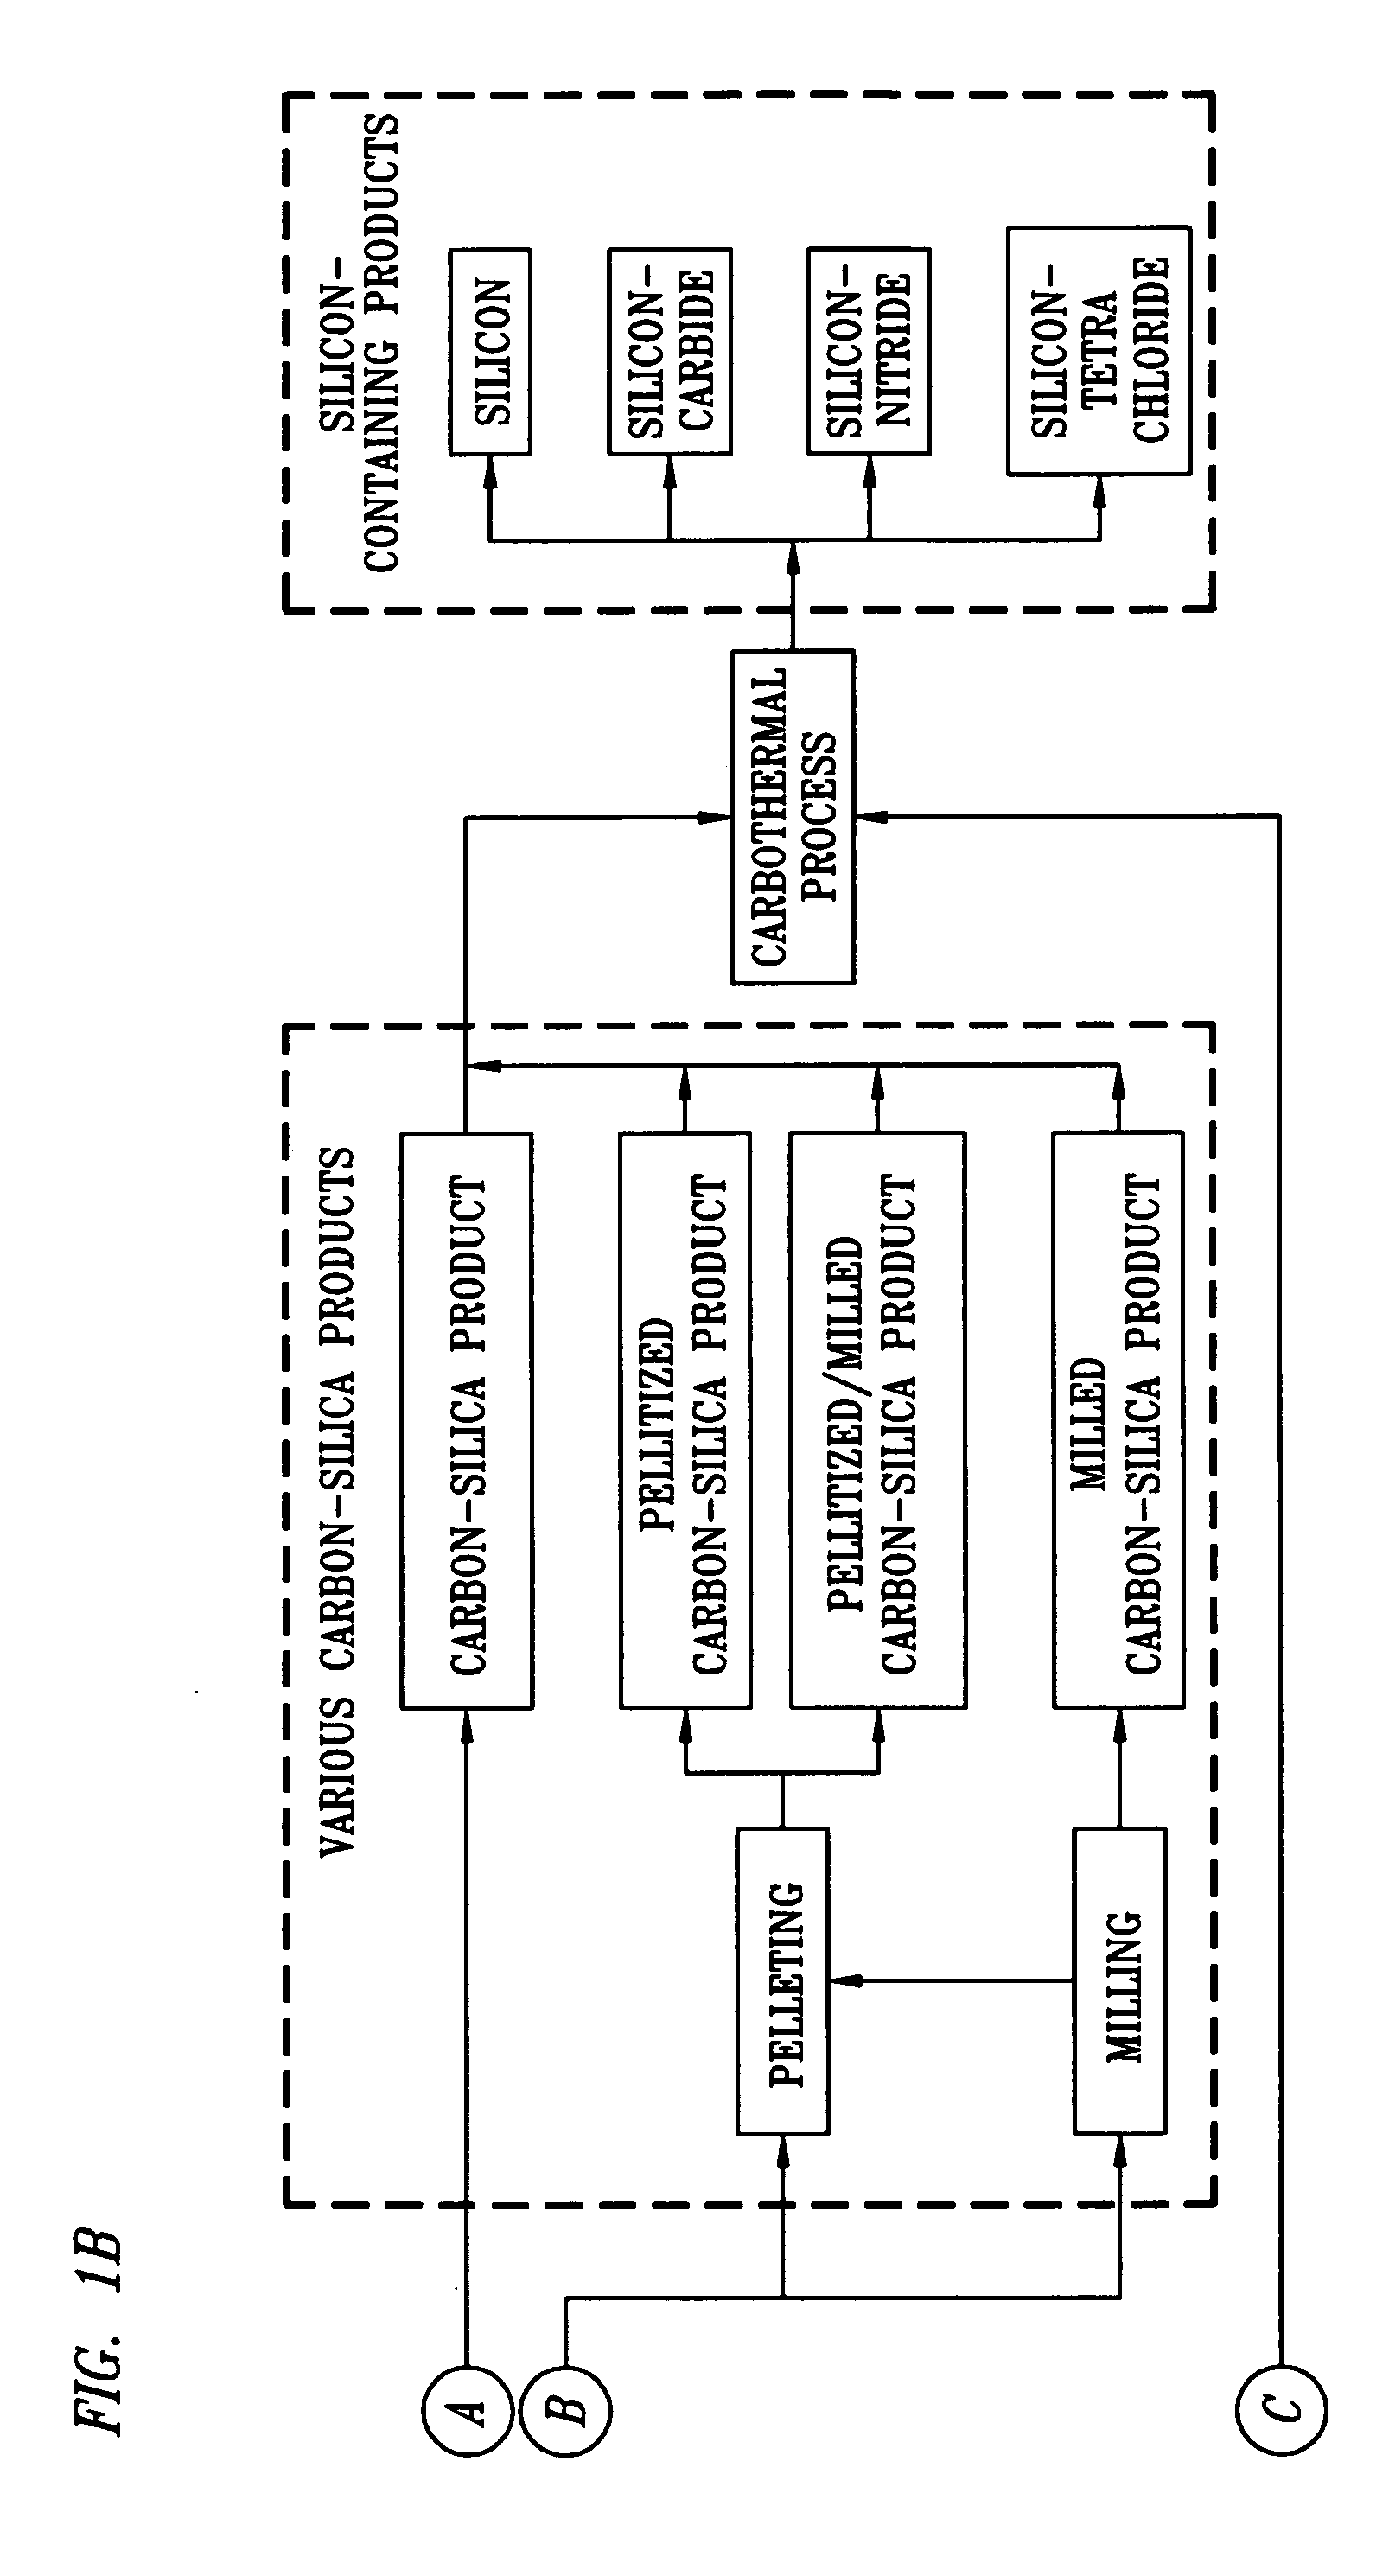 Composition and method for making silicon-containing products